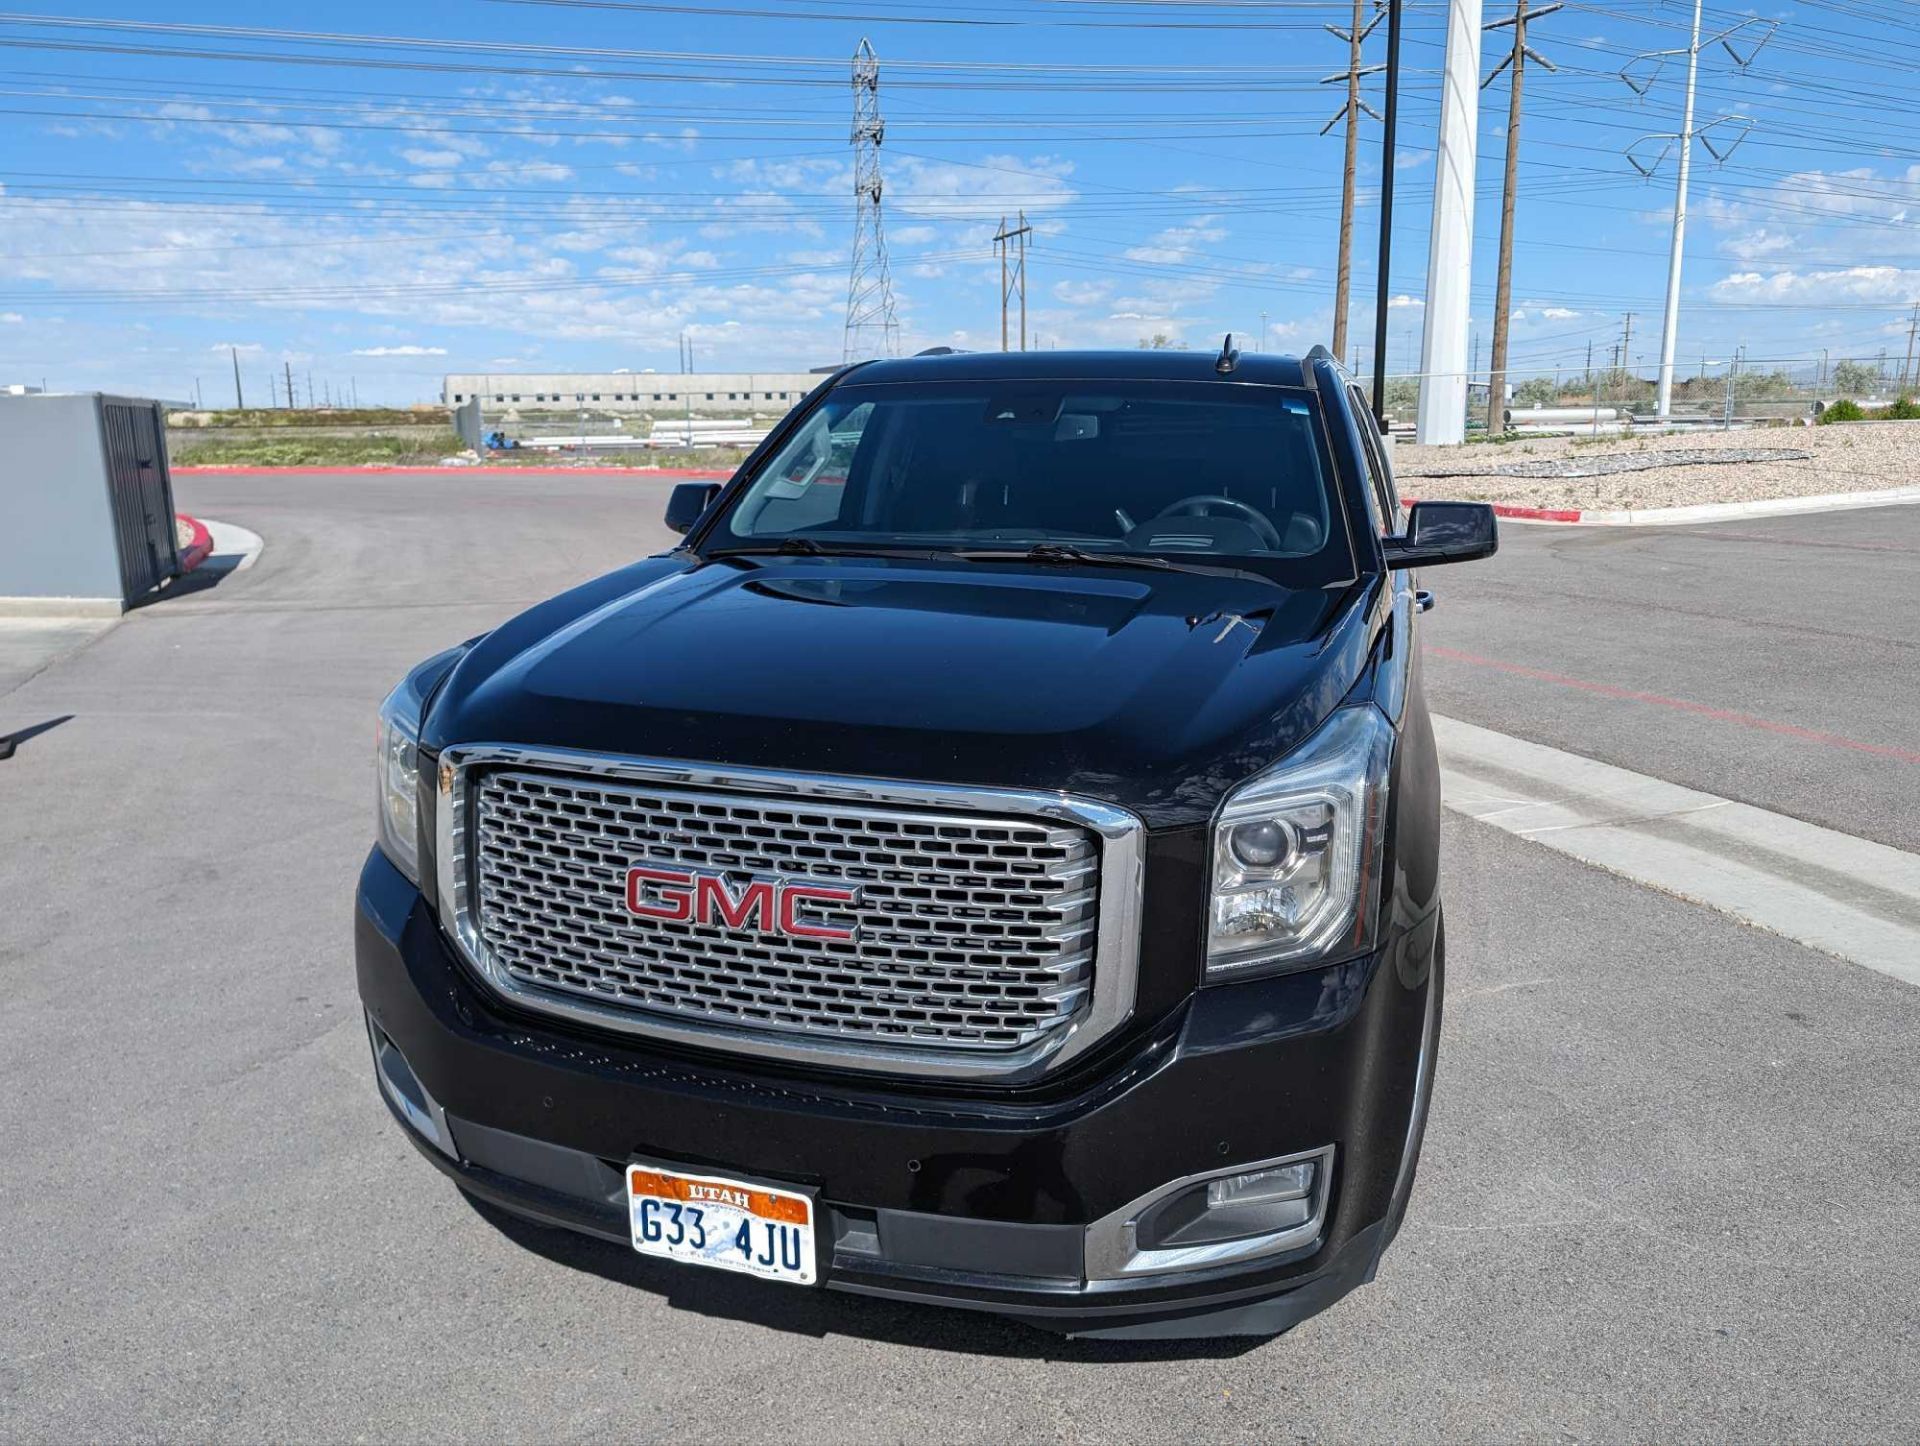 2017 GMC Yukon XL Denali w/ 111K Miles, 4wd, v8 VIN #: 1GKS2HKJ4HR323051 Features & notes: runs and - Image 2 of 16